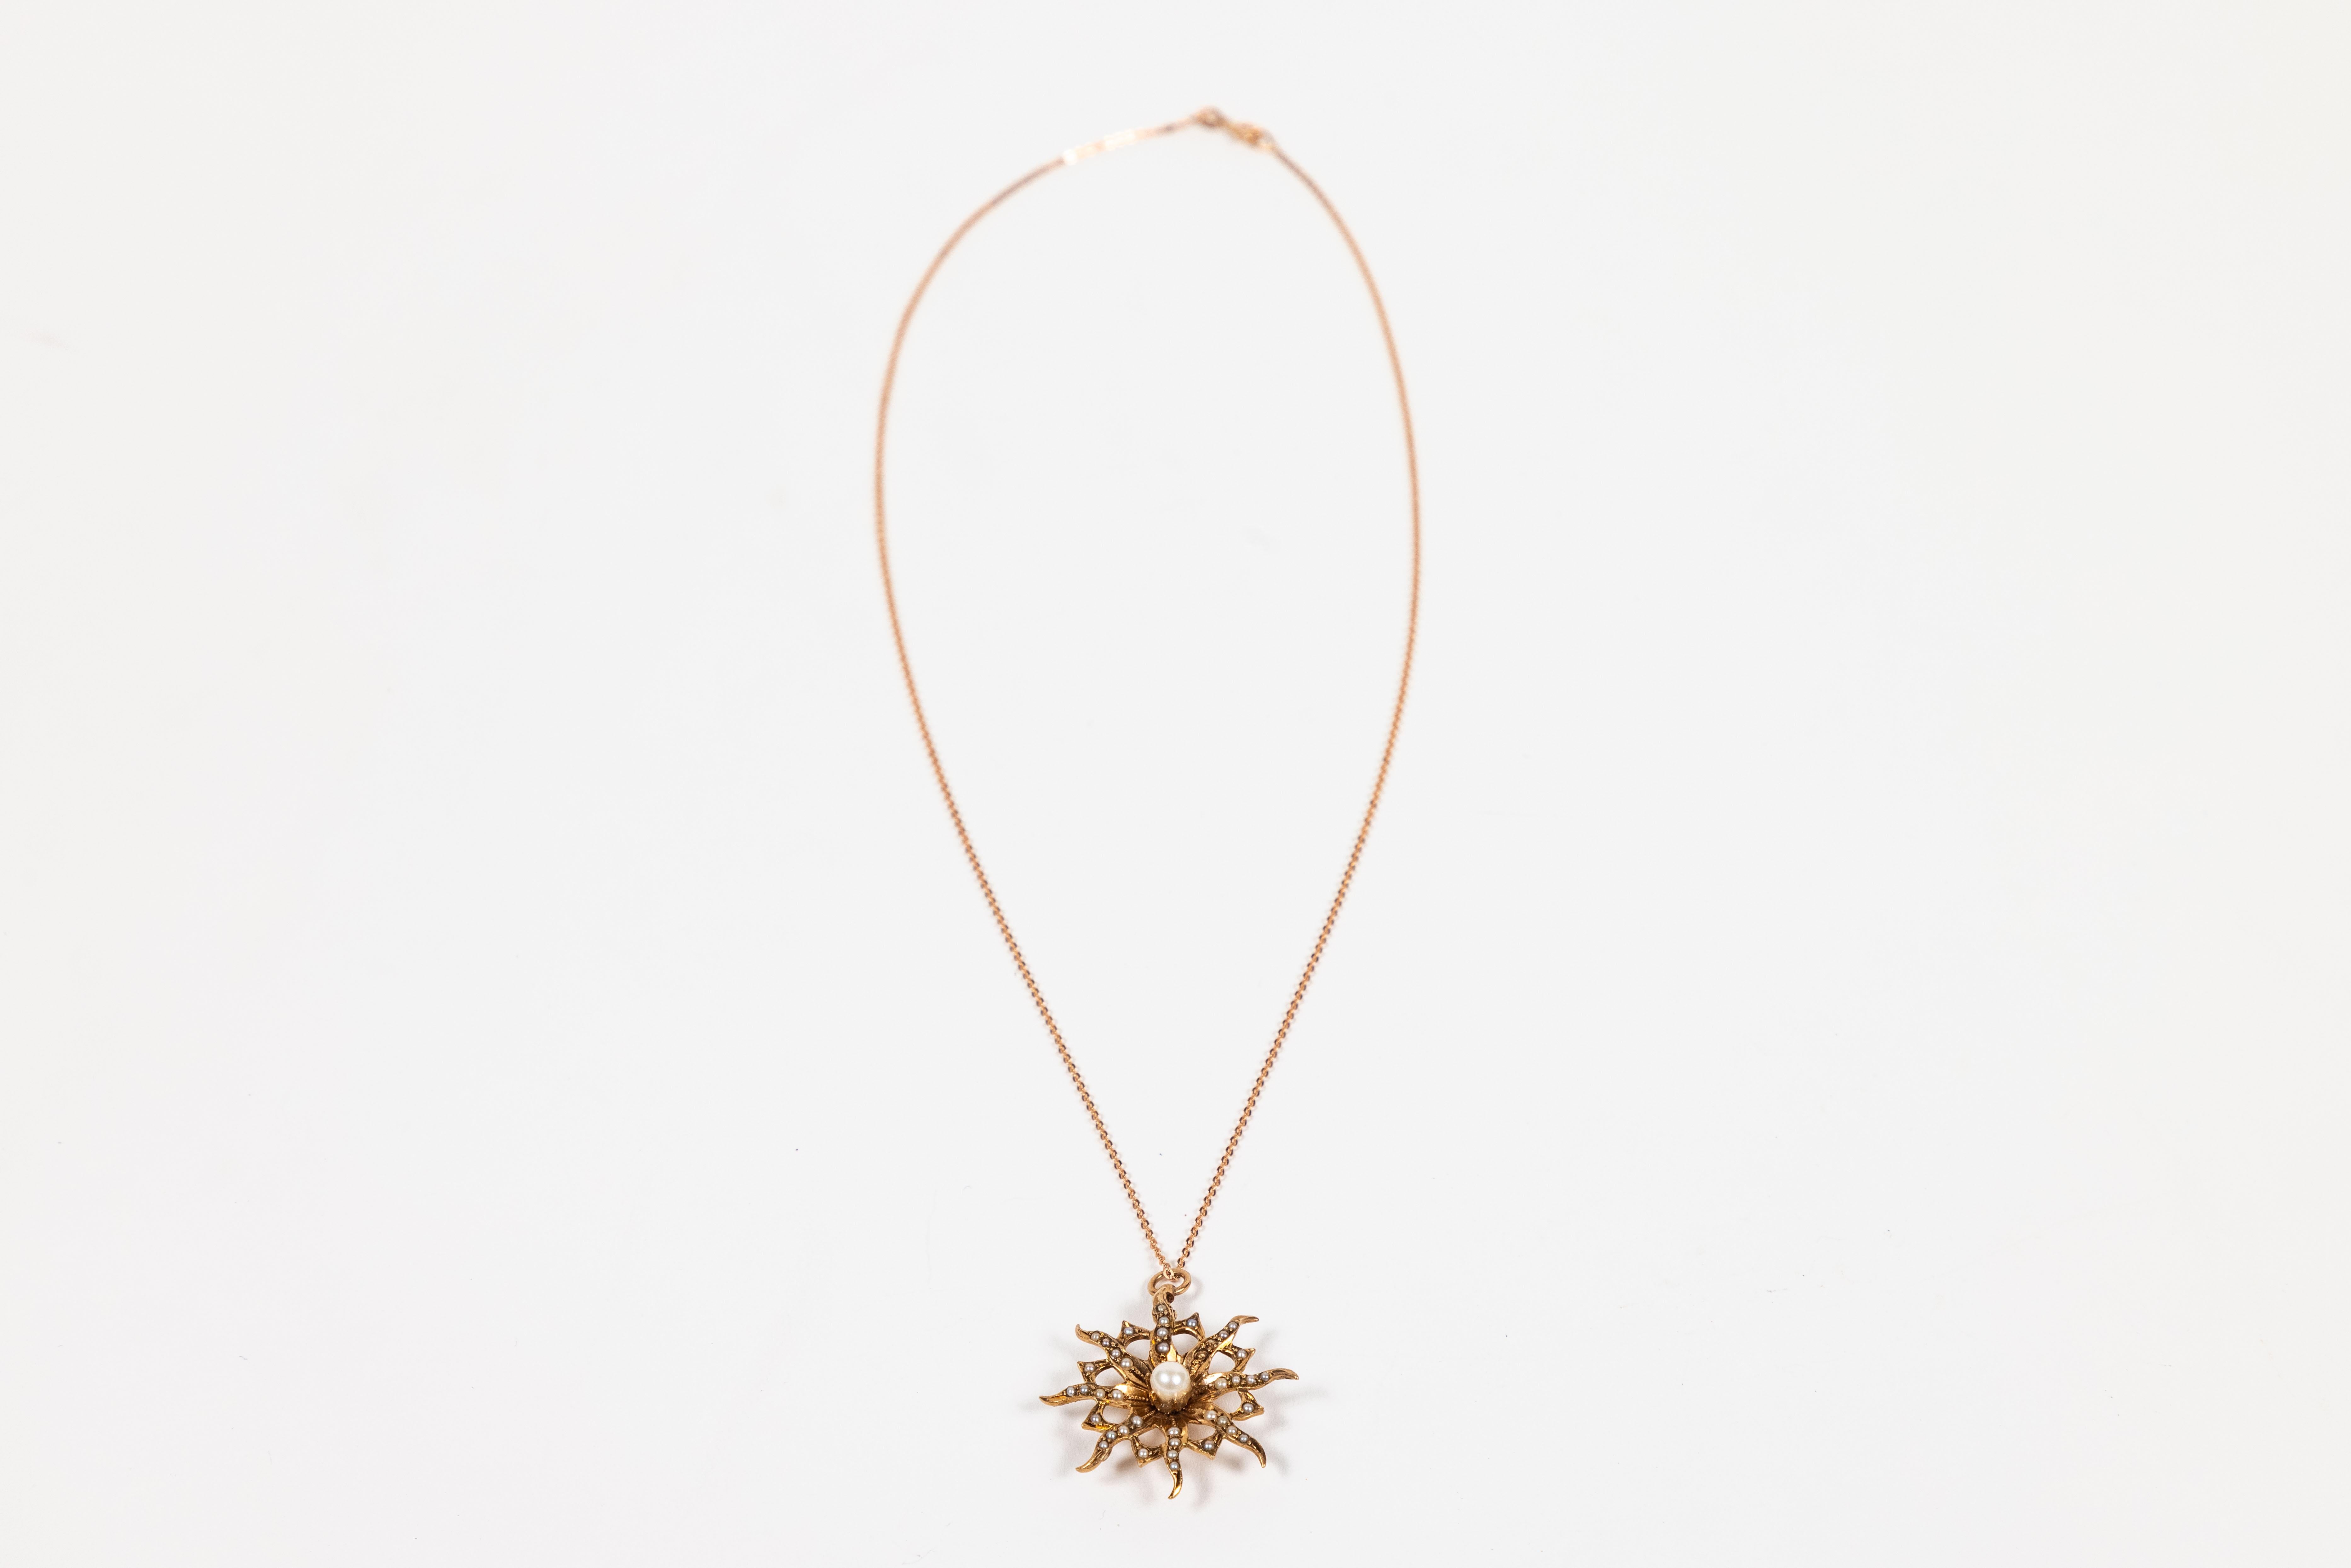 Vintage 10K rose gold Starburst Pendant with Seed Pearls and 1 larger center Pearl and new 14k rose gold chain.